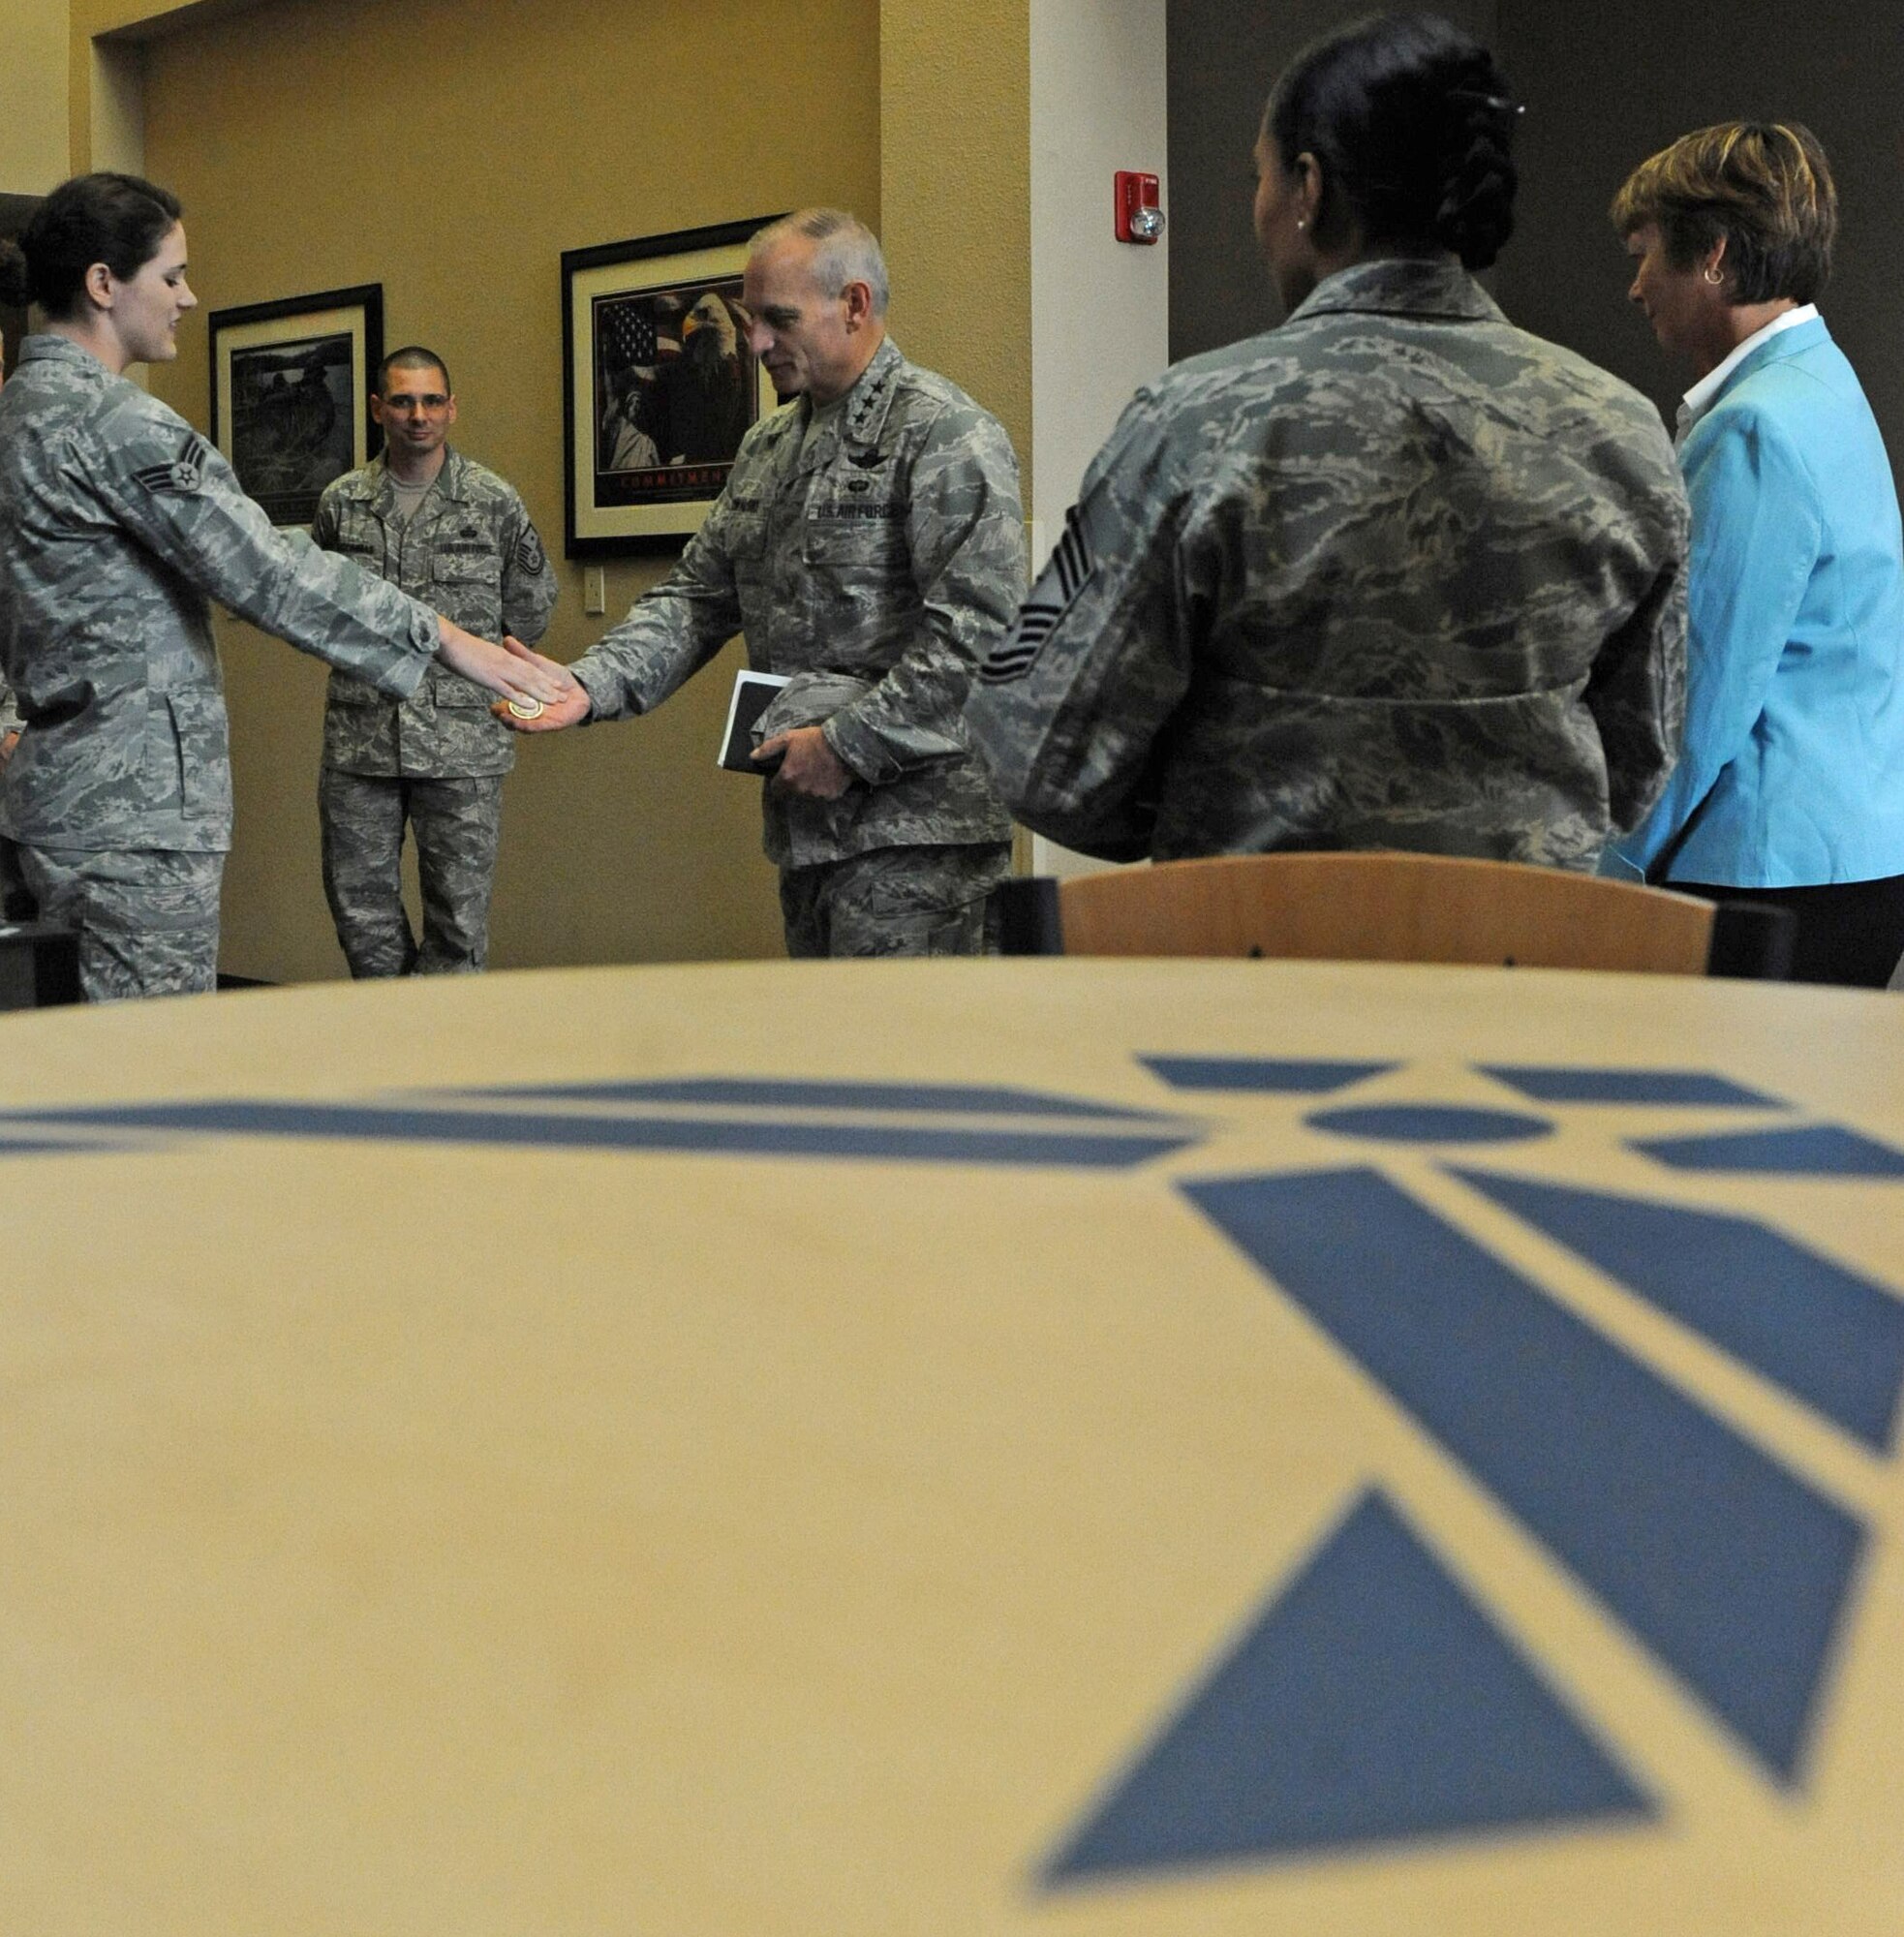 Lt. Gen. James Kowalski, Air Force Global Strike Command commander, presents a coin to Senior Airman Jennifer Coffin, president of the Barksdale Chapter of Airman Against Drunk Driving, at Barksdale Air Force Base, La., May 19. Airman Coffin briefed General Kowalski about the AADD program and future plans to improve the program. (U.S. Air Force photo/Airman 1st Class Micaiah Anthony)(RELEASED)